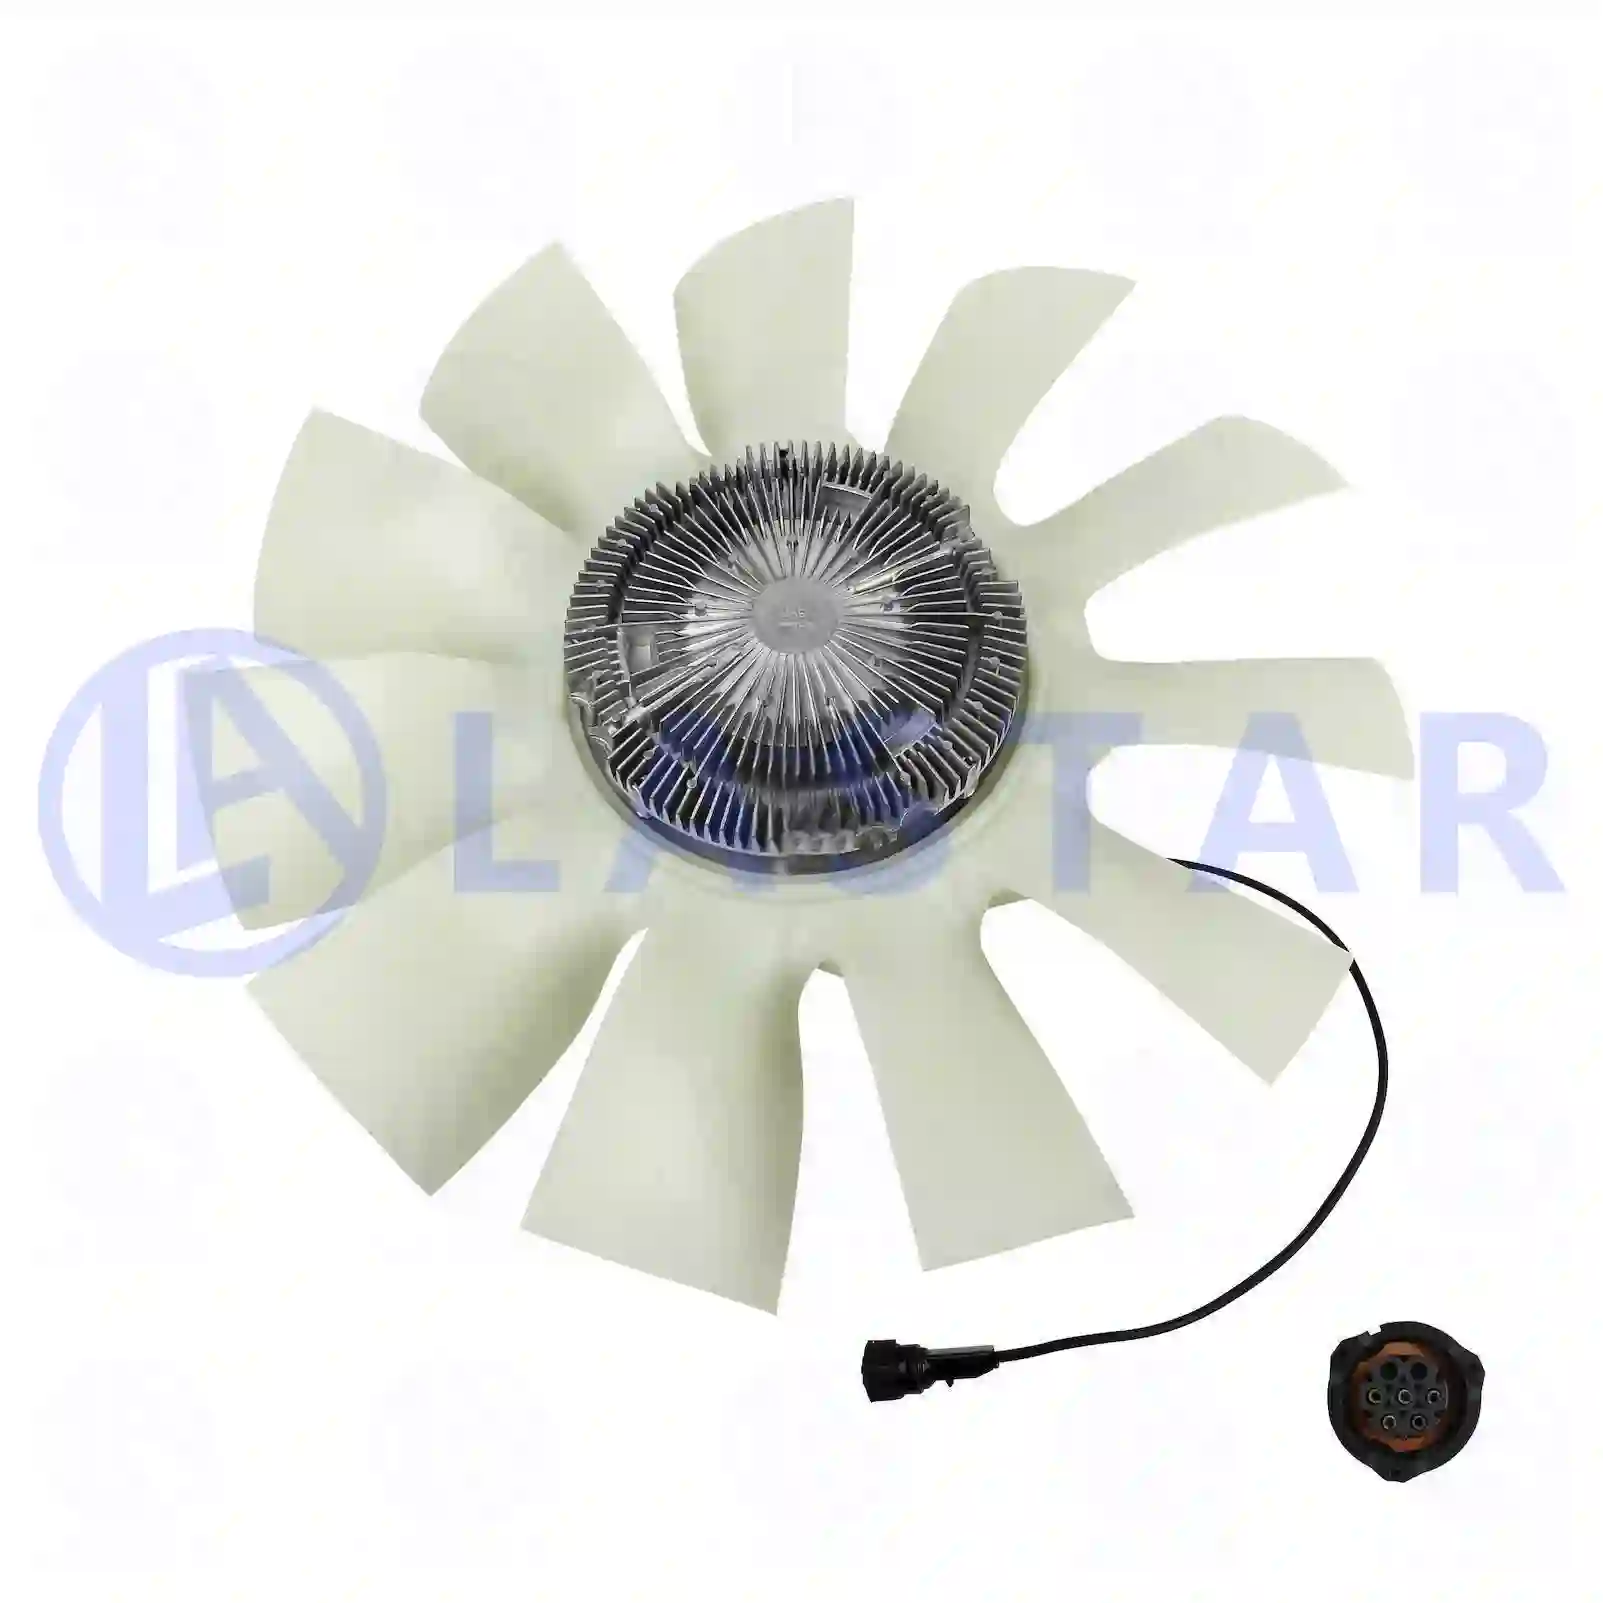 Fan with clutch, 77709421, 7421012697, 20004580, 20576186, 21054616, 21270991, 21772668, 85003135, 85013142, ZG00403-0008 ||  77709421 Lastar Spare Part | Truck Spare Parts, Auotomotive Spare Parts Fan with clutch, 77709421, 7421012697, 20004580, 20576186, 21054616, 21270991, 21772668, 85003135, 85013142, ZG00403-0008 ||  77709421 Lastar Spare Part | Truck Spare Parts, Auotomotive Spare Parts